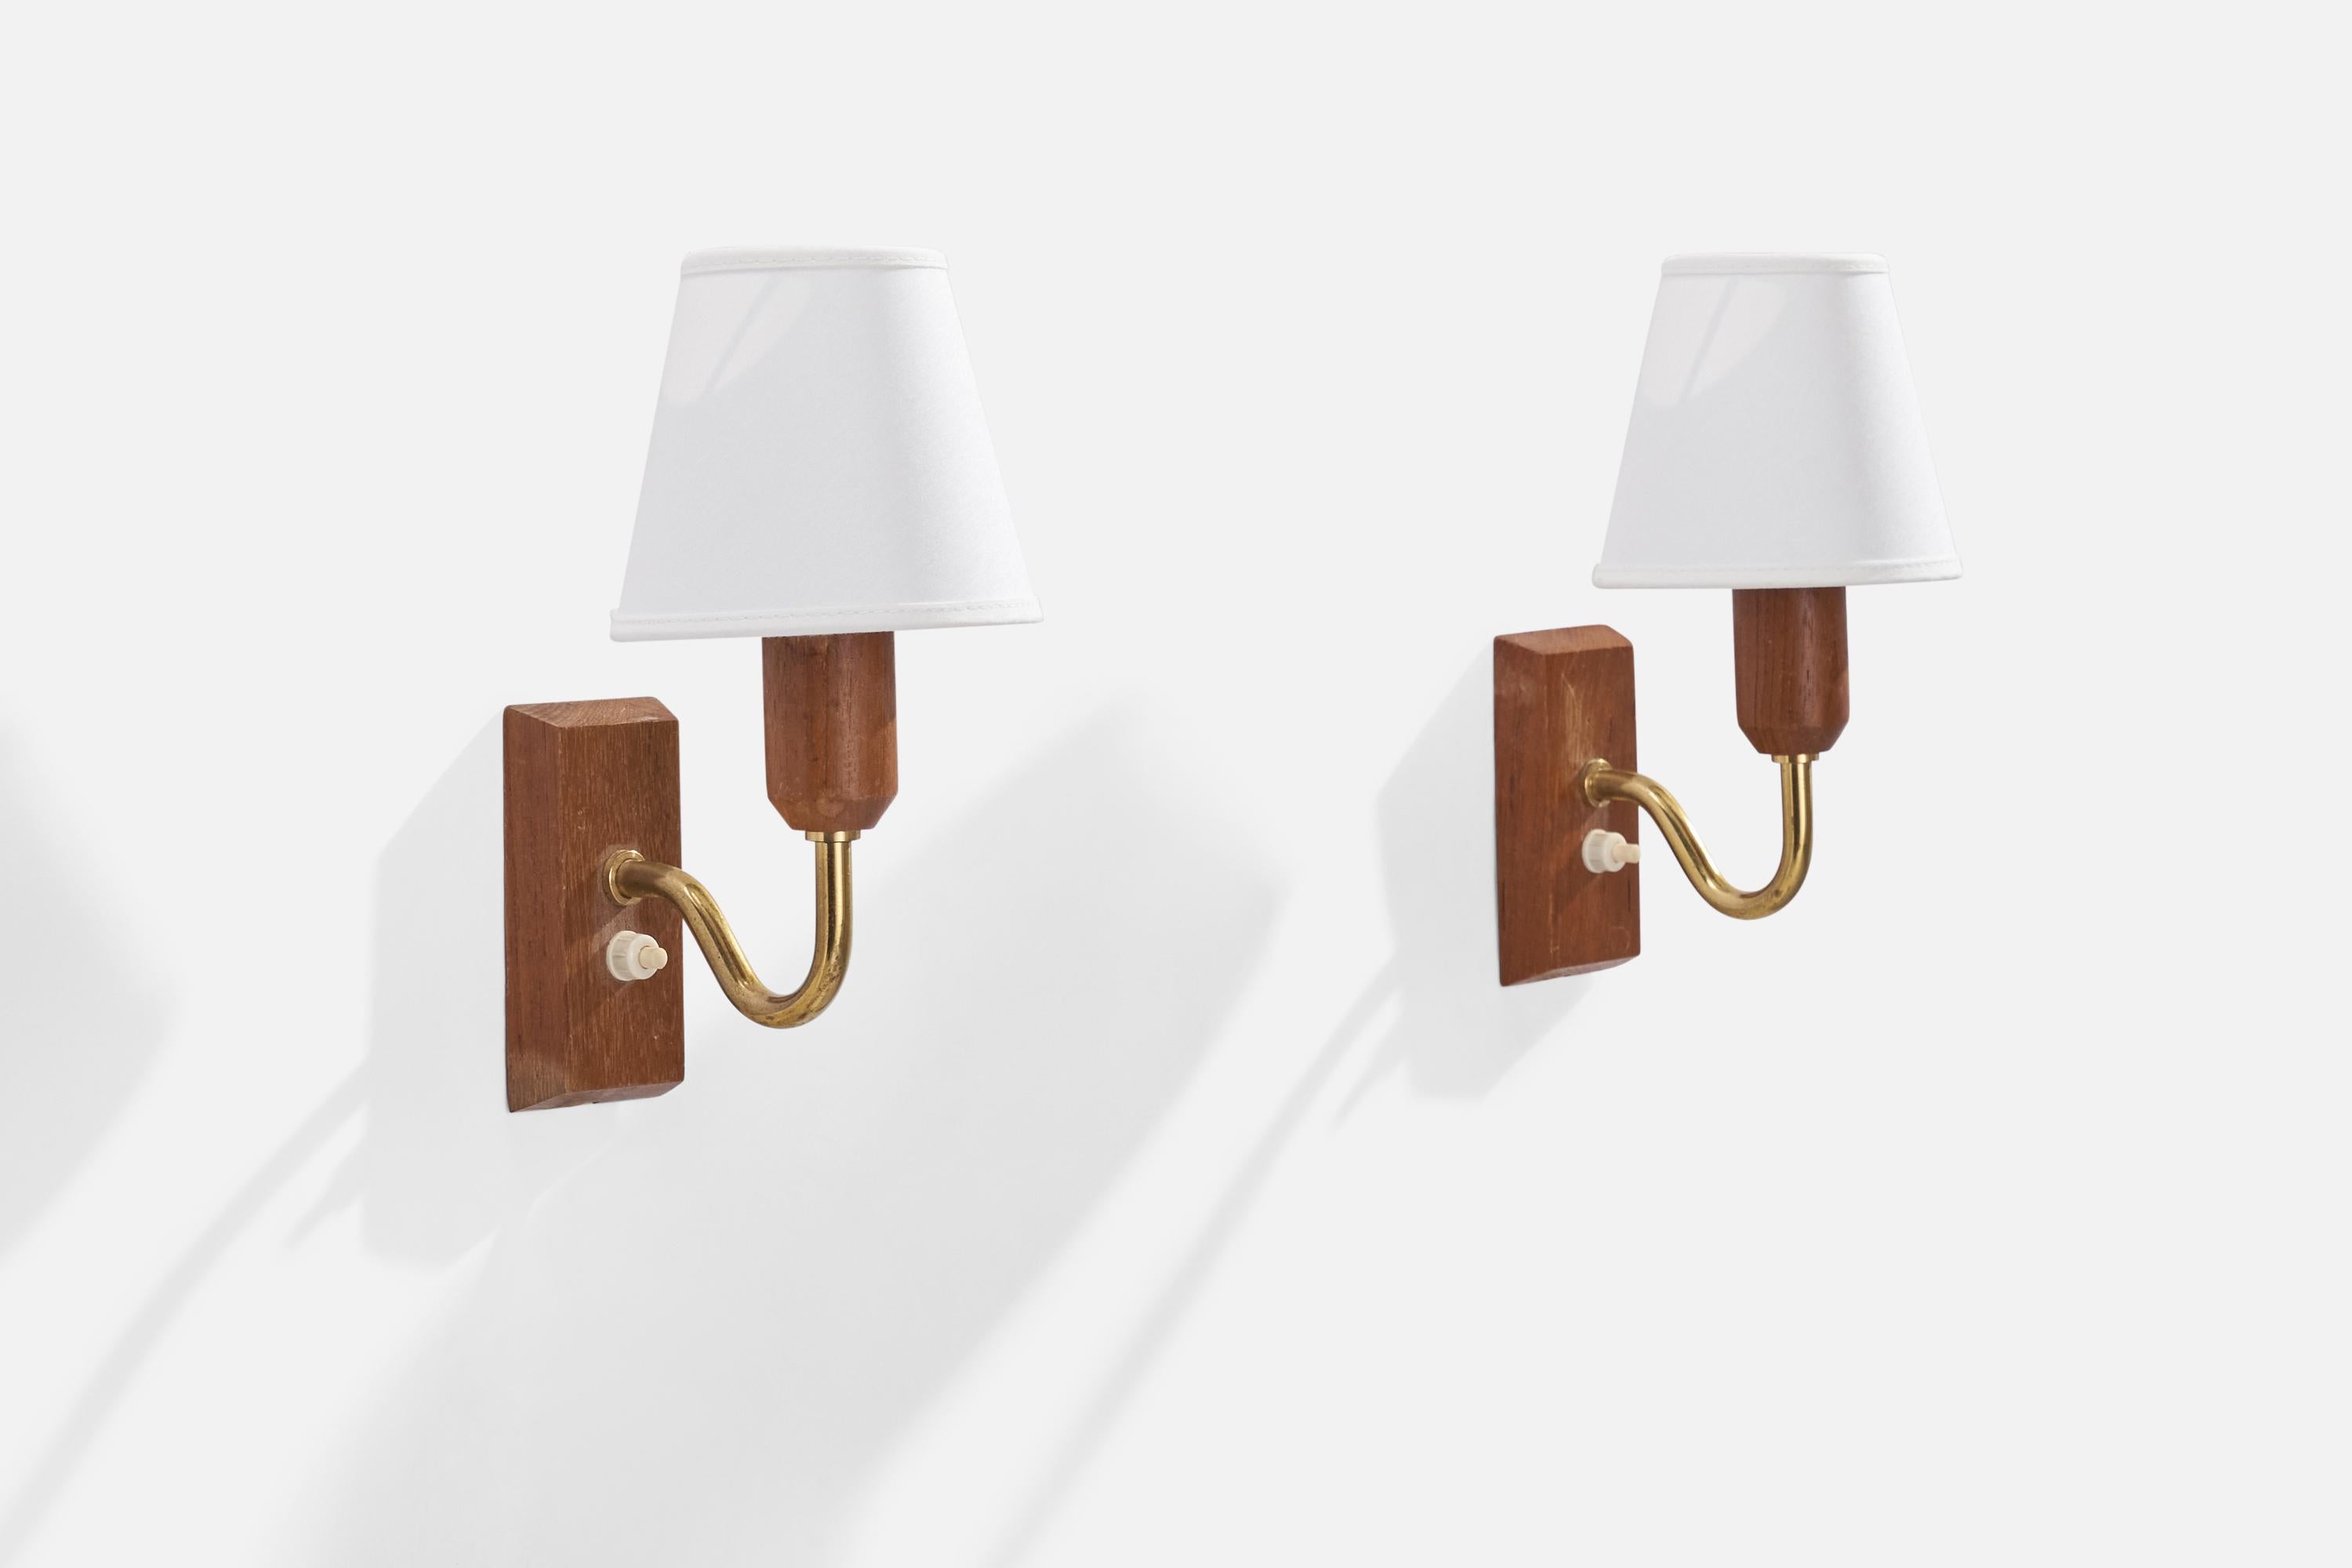 A pair of brass, white fabric and teak wall lights designed and produced in Sweden, 1950s.

Overall Dimensions (inches): 8.67” H x 3.94” W x 6.3”  D
Back Plate Dimensions (inches): 4.5” H x 2.25” W x .75”  D
Bulb Specifications: E-14 Bulb
Number of